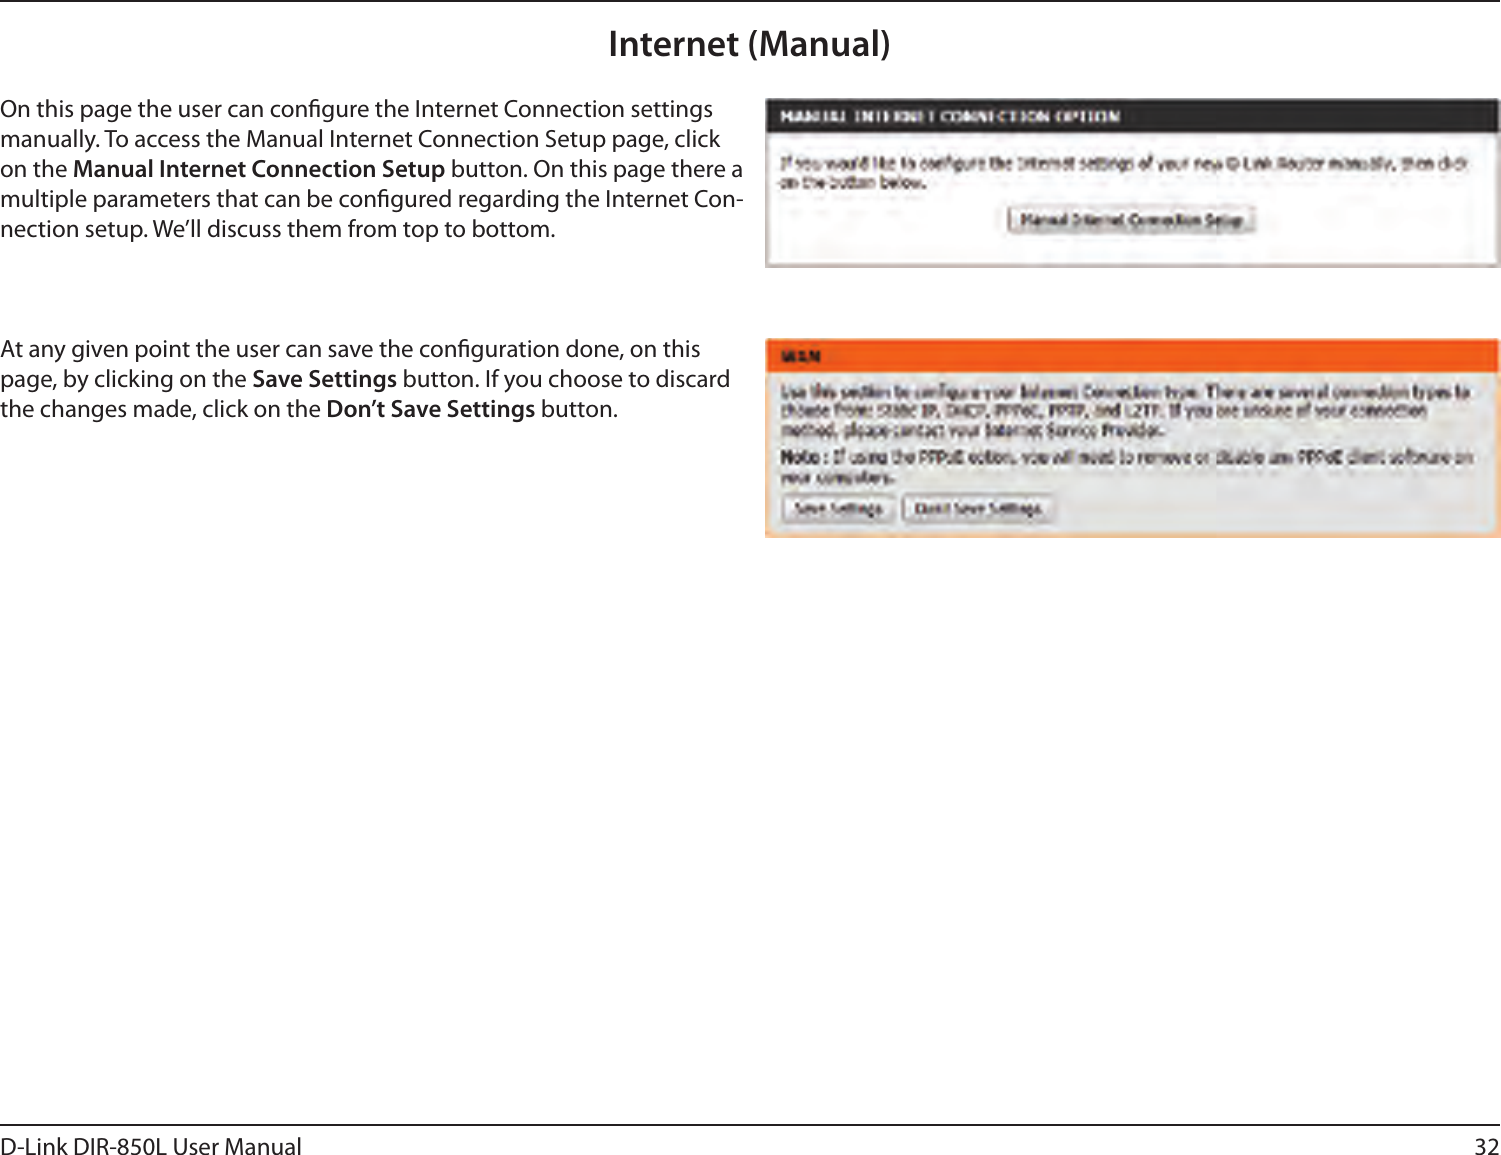 32D-Link DIR-850L User ManualInternet (Manual)On this page the user can congure the Internet Connection settings manually. To access the Manual Internet Connection Setup page, click on the Manual Internet Connection Setup button. On this page there a multiple parameters that can be congured regarding the Internet Con-nection setup. We’ll discuss them from top to bottom.At any given point the user can save the conguration done, on this page, by clicking on the Save Settings button. If you choose to discard the changes made, click on the Don’t Save Settings button.